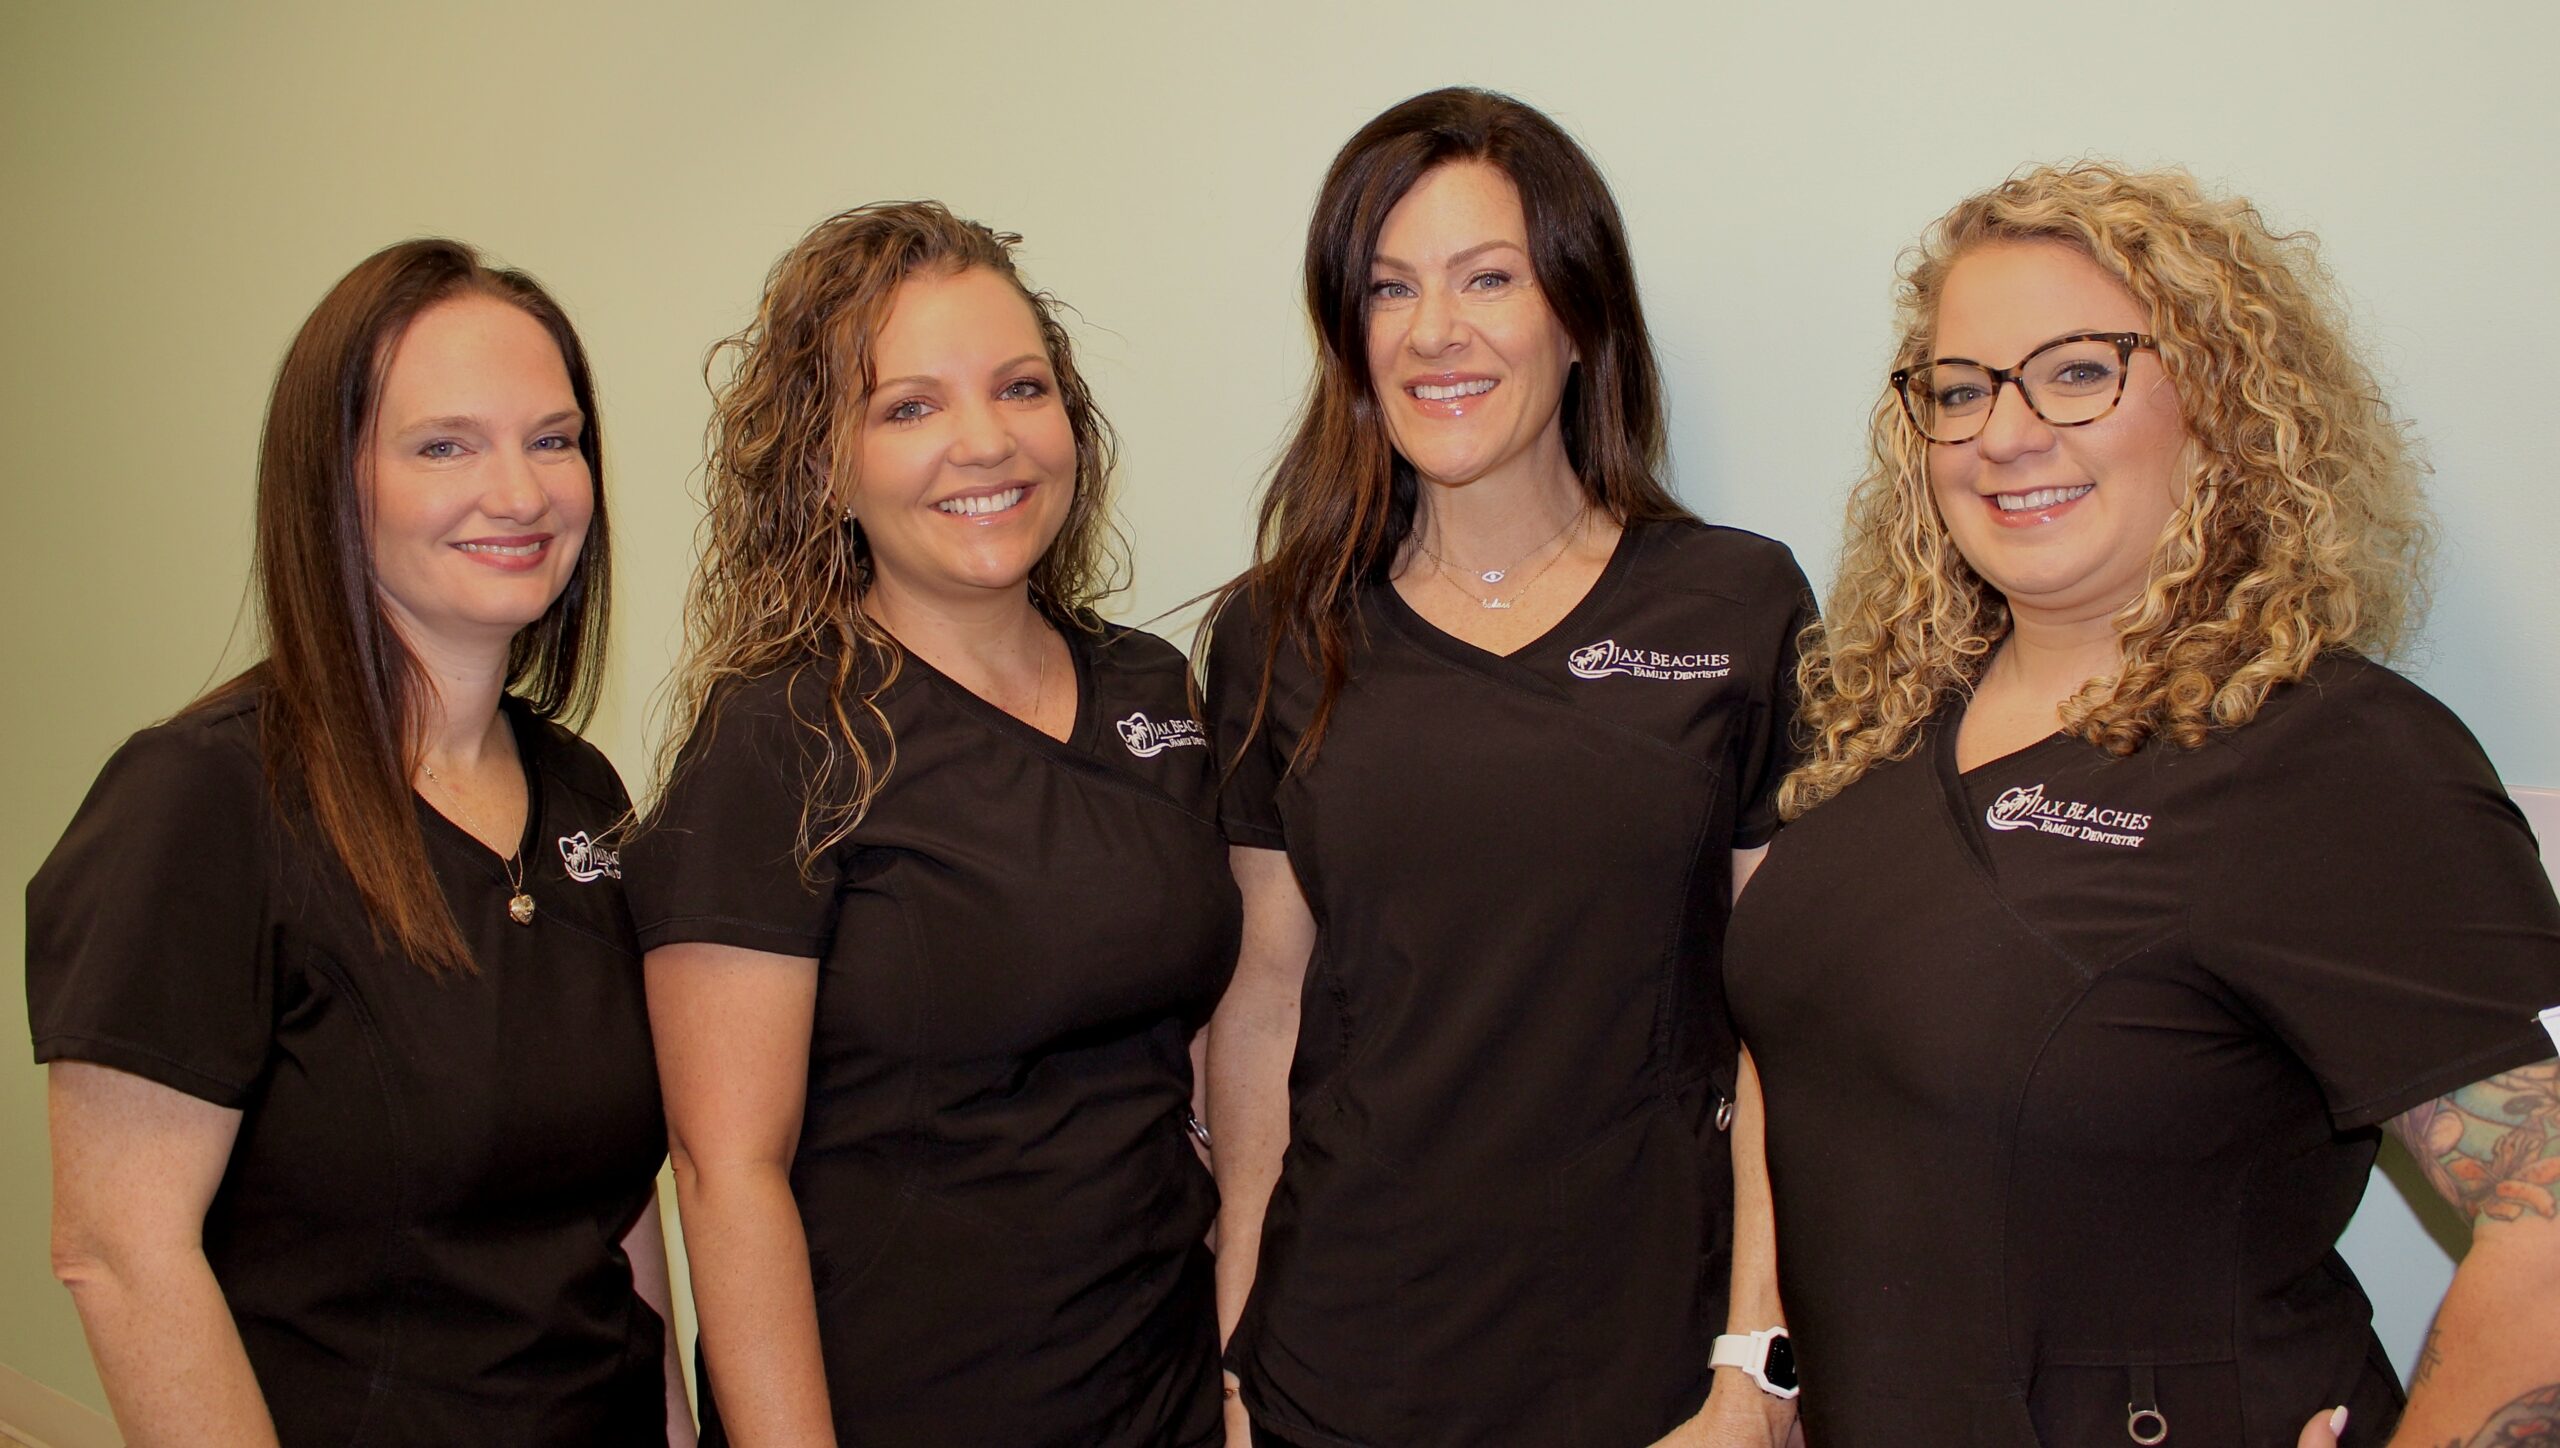 Our expert dental assistant team at Jax Beaches Family Dentistry in Neptune Beach, FL